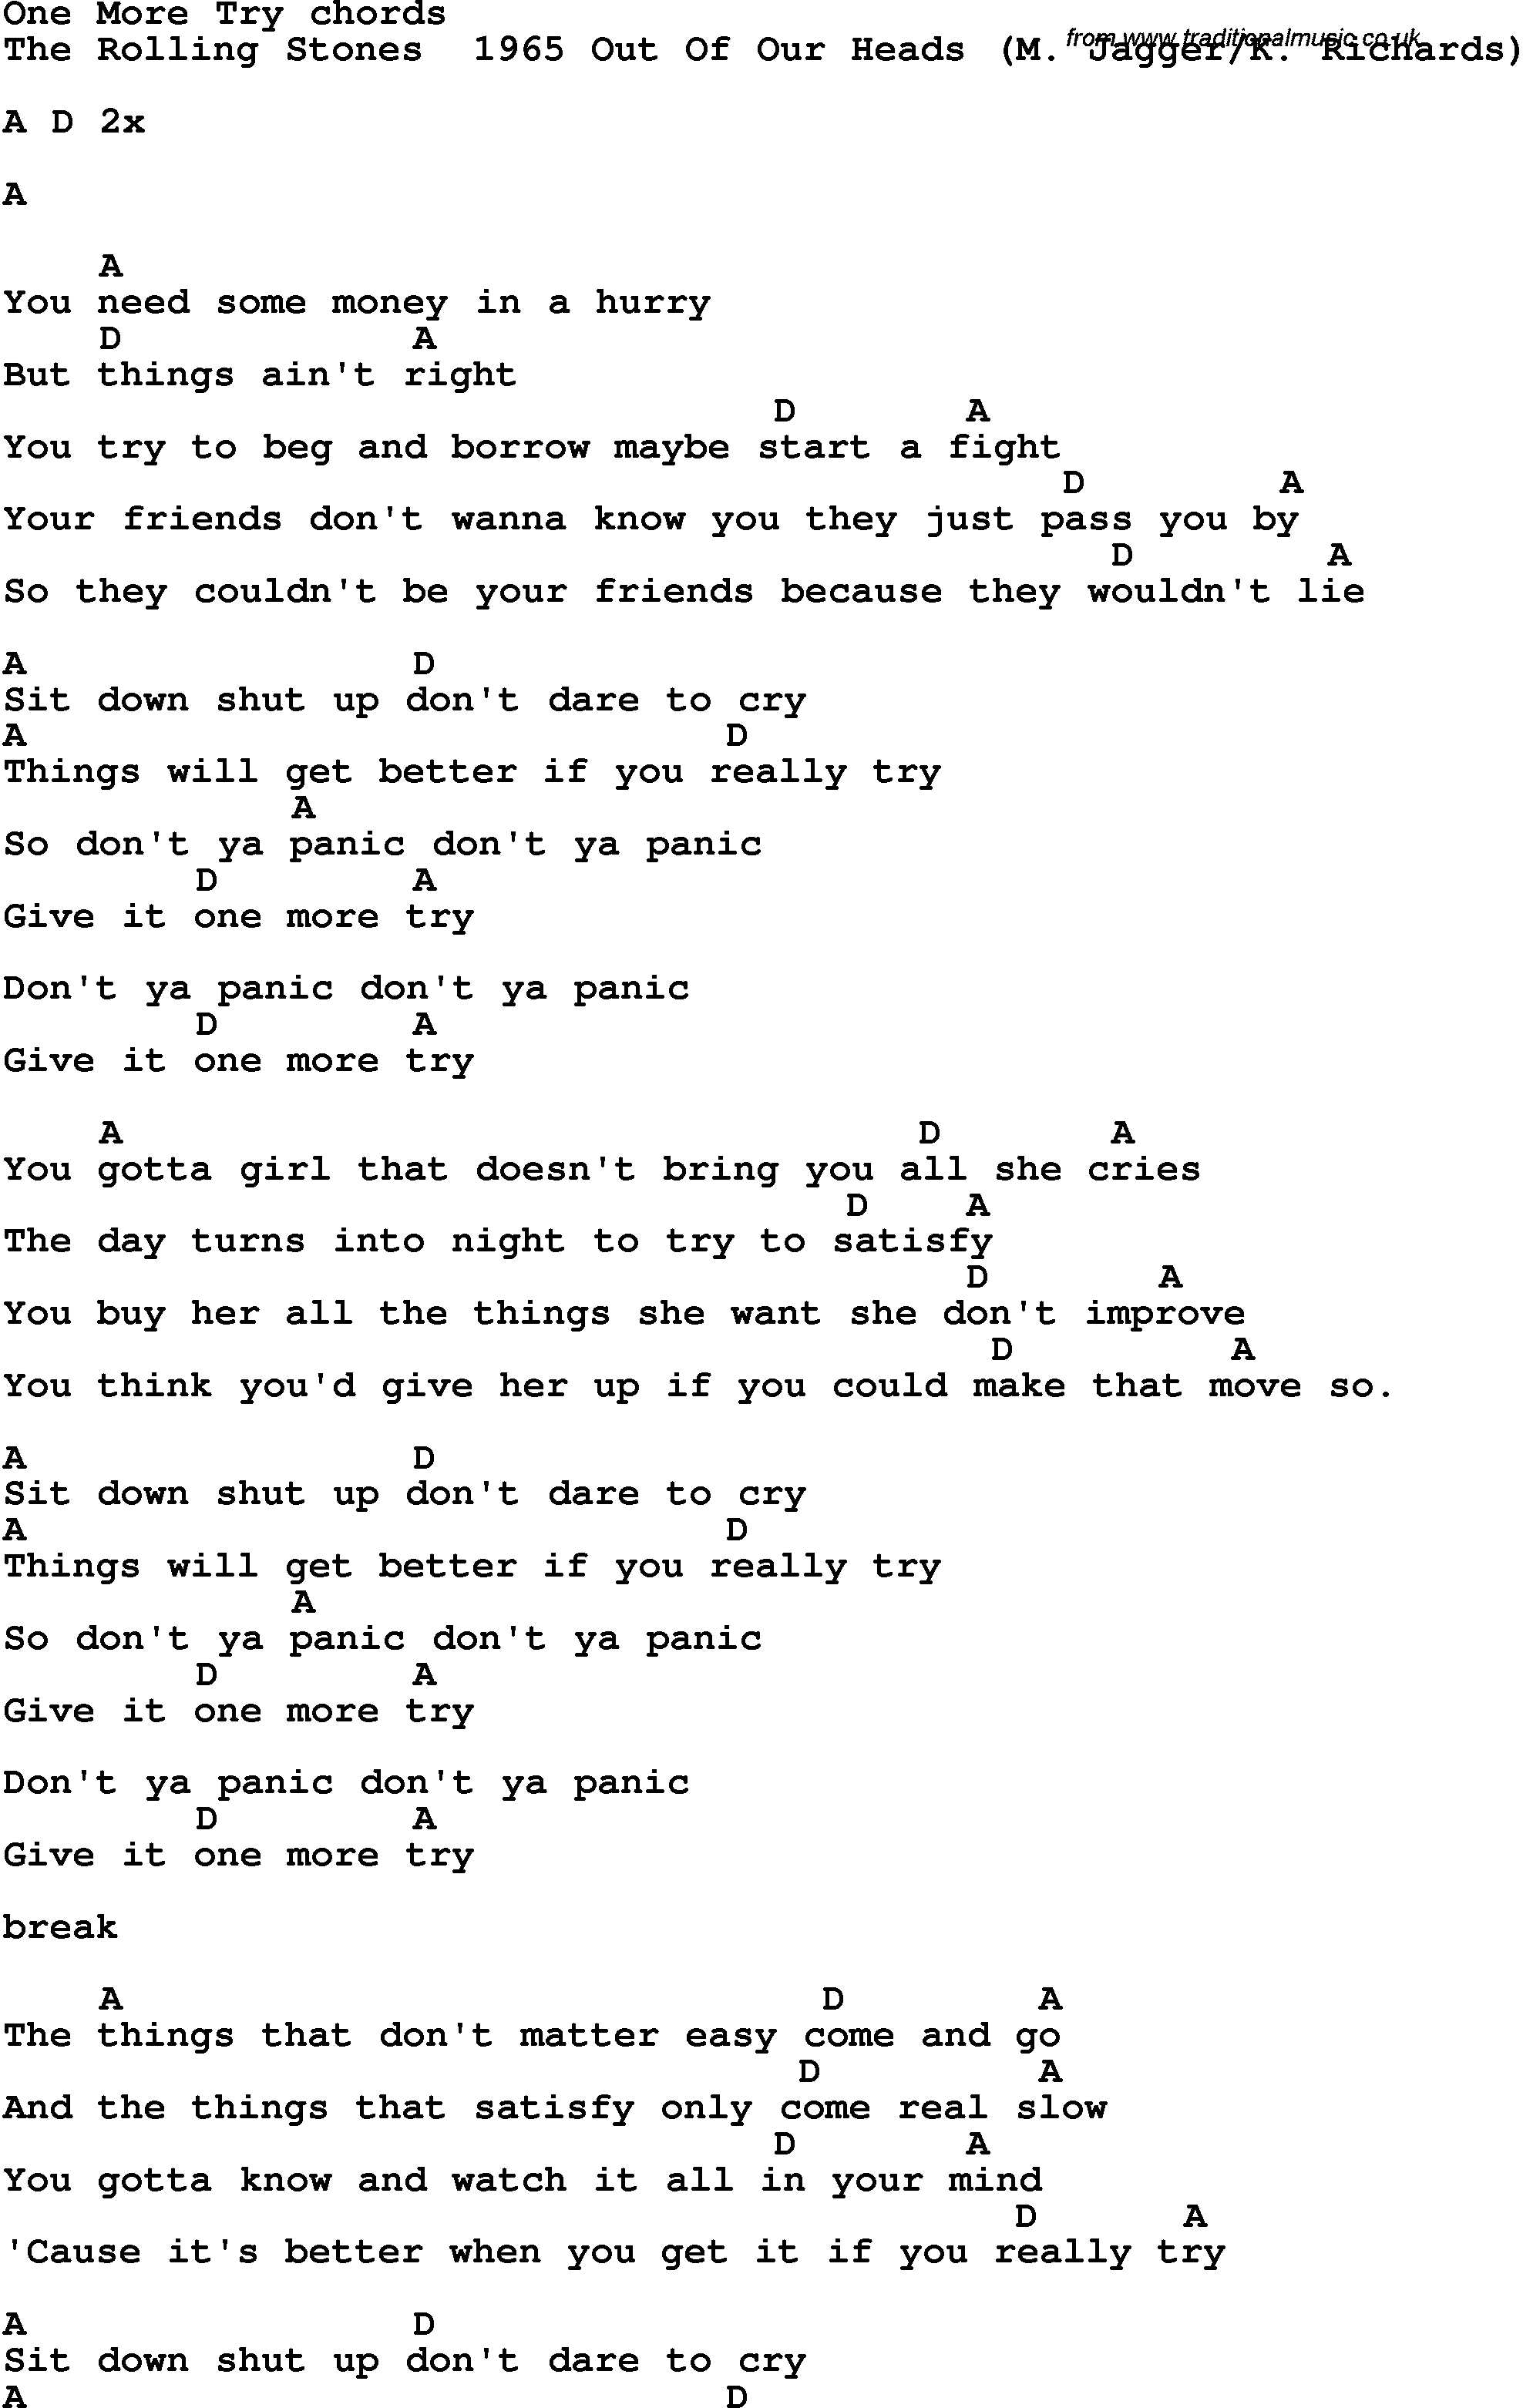 Song Lyrics with guitar chords for One More Try